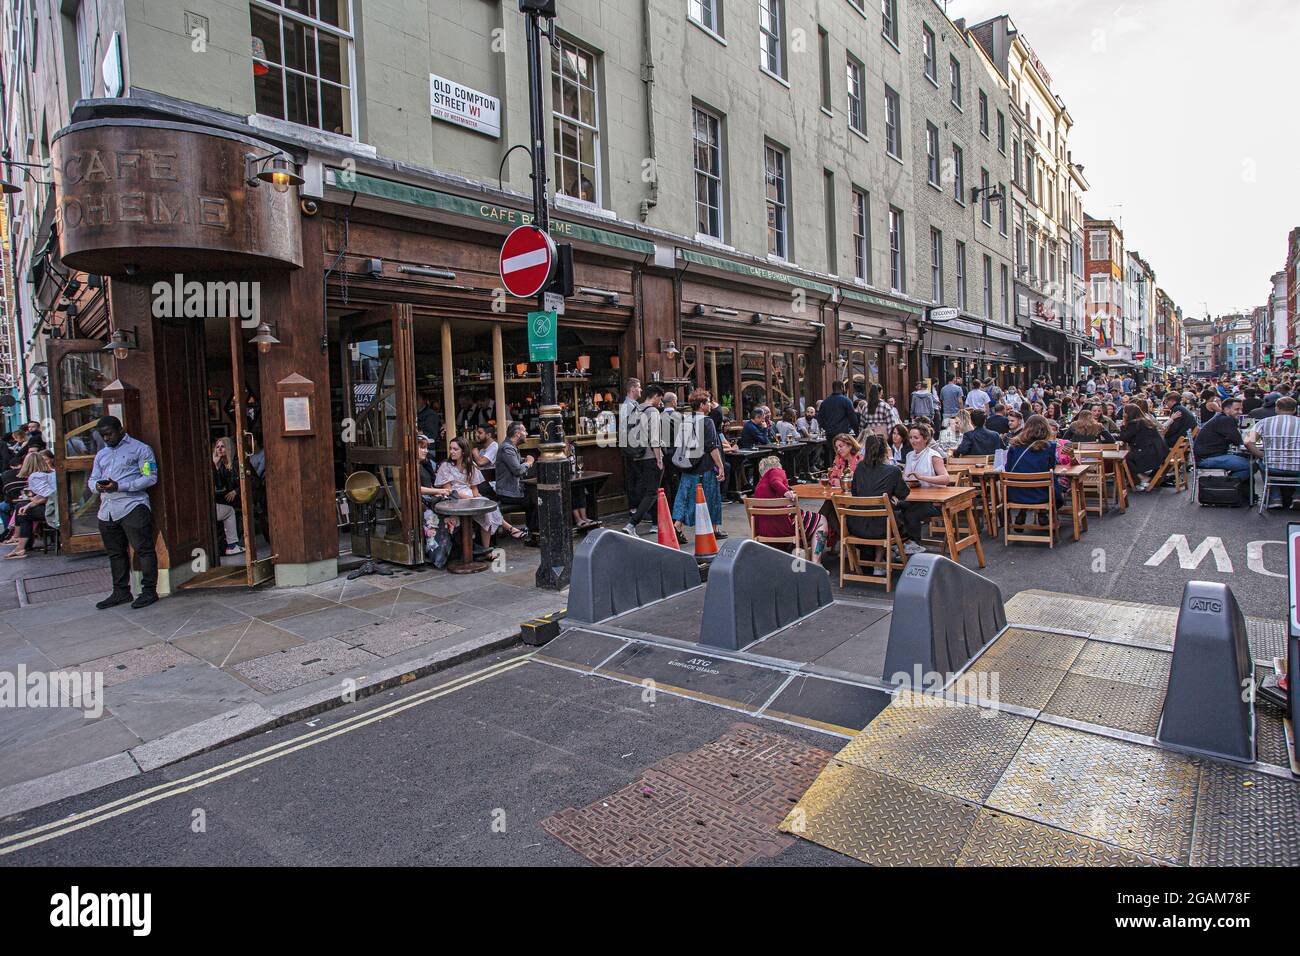 People celebrating 'freedom day' ending over a year of COVID-19 lockdown restrictions in England people drinking on tables placed outside on  Old Comp Stock Photo